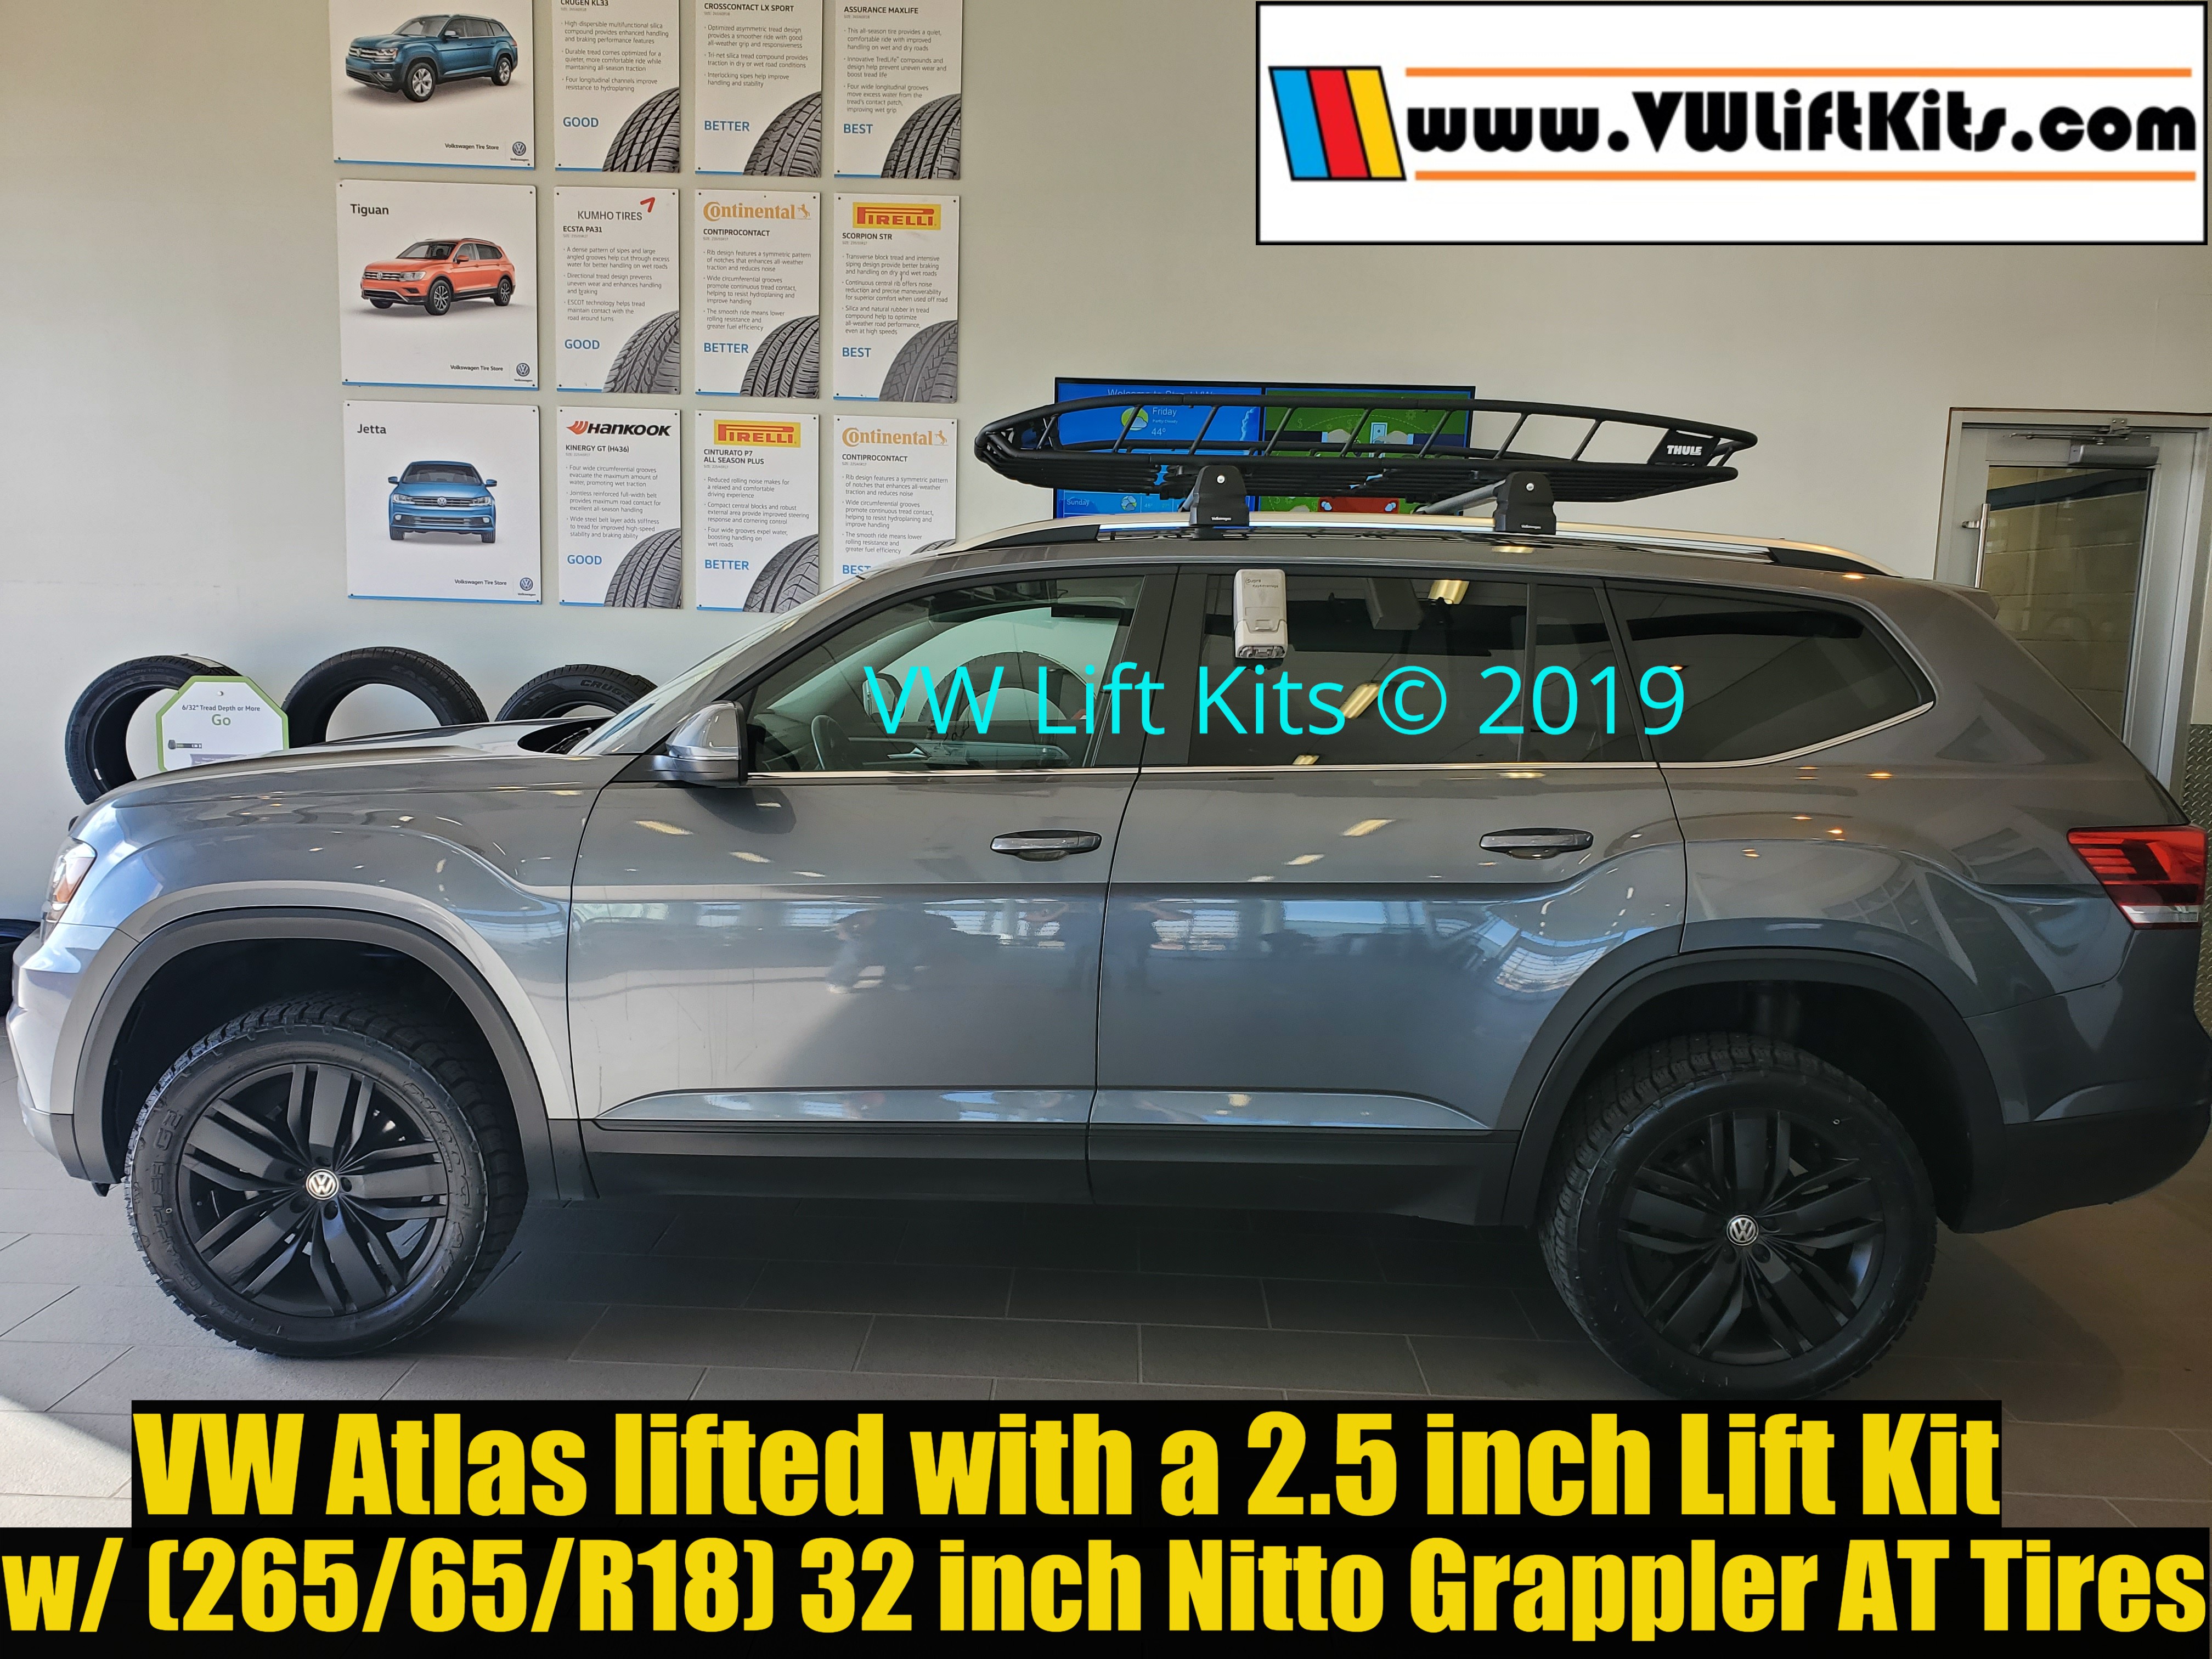 VW Atlas lifted properly at Street VW Dealership in Amarillo Texas. Top of the line bolt-on kit.